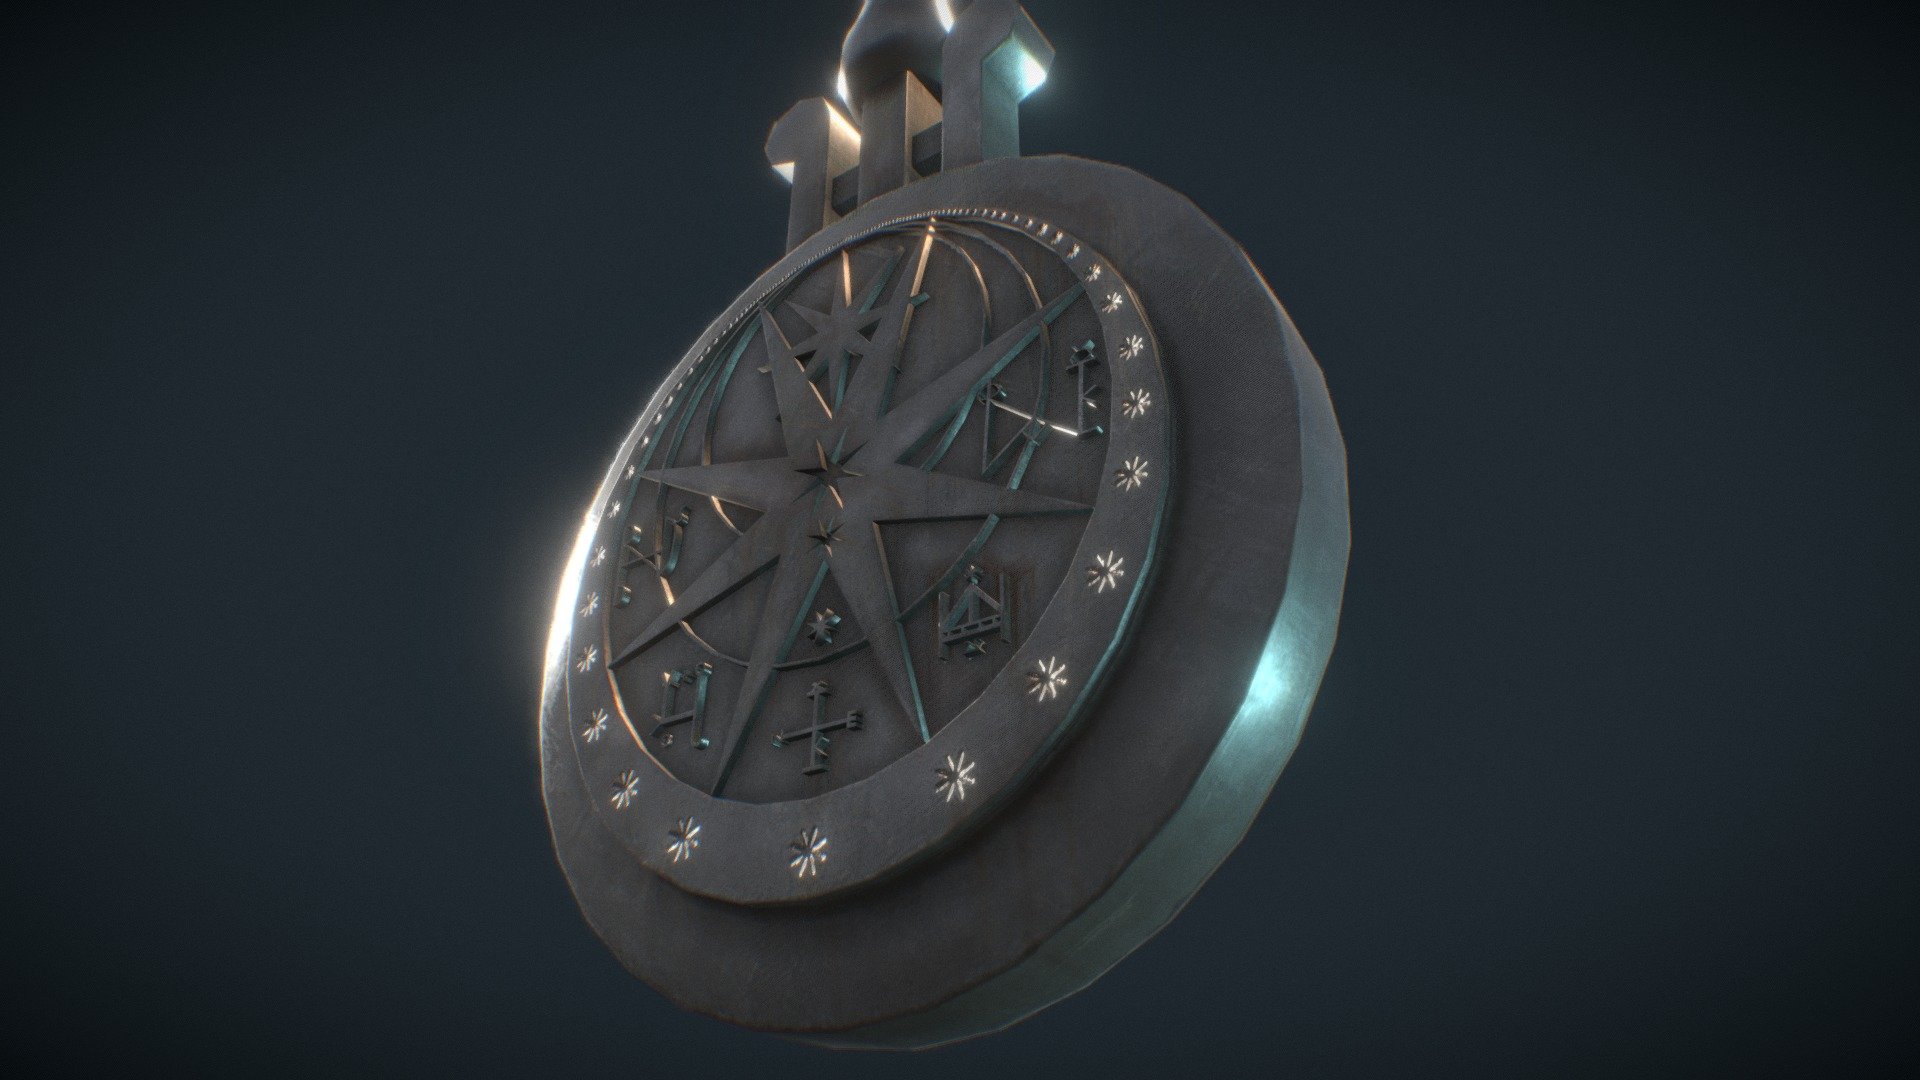 Hi everyone! I'm working on some Harry Potter  project now. Just showing here one of the models from this and hope you'll like it! - Harry Potter - Pendulum - 3D model by FenixST 3d model